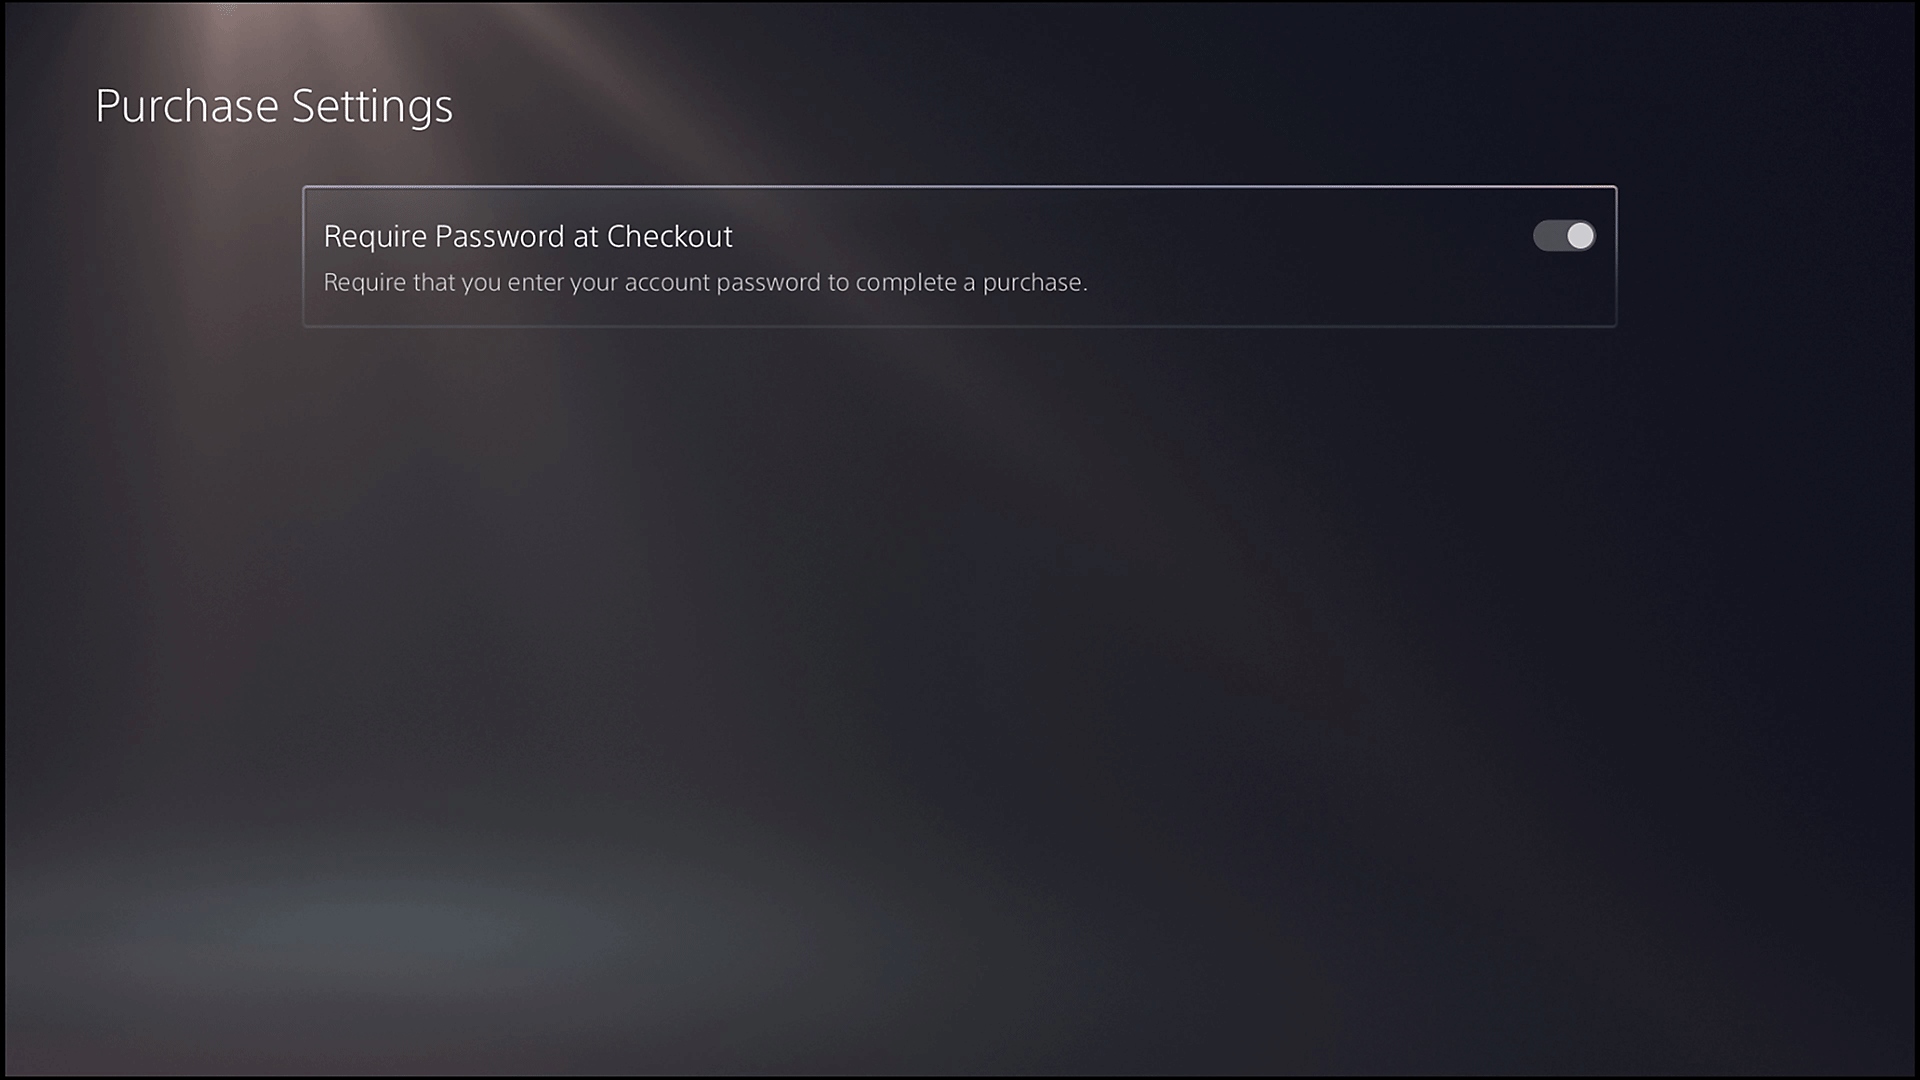 PS5 Purchase Settings screen with Require Password at Checkout option